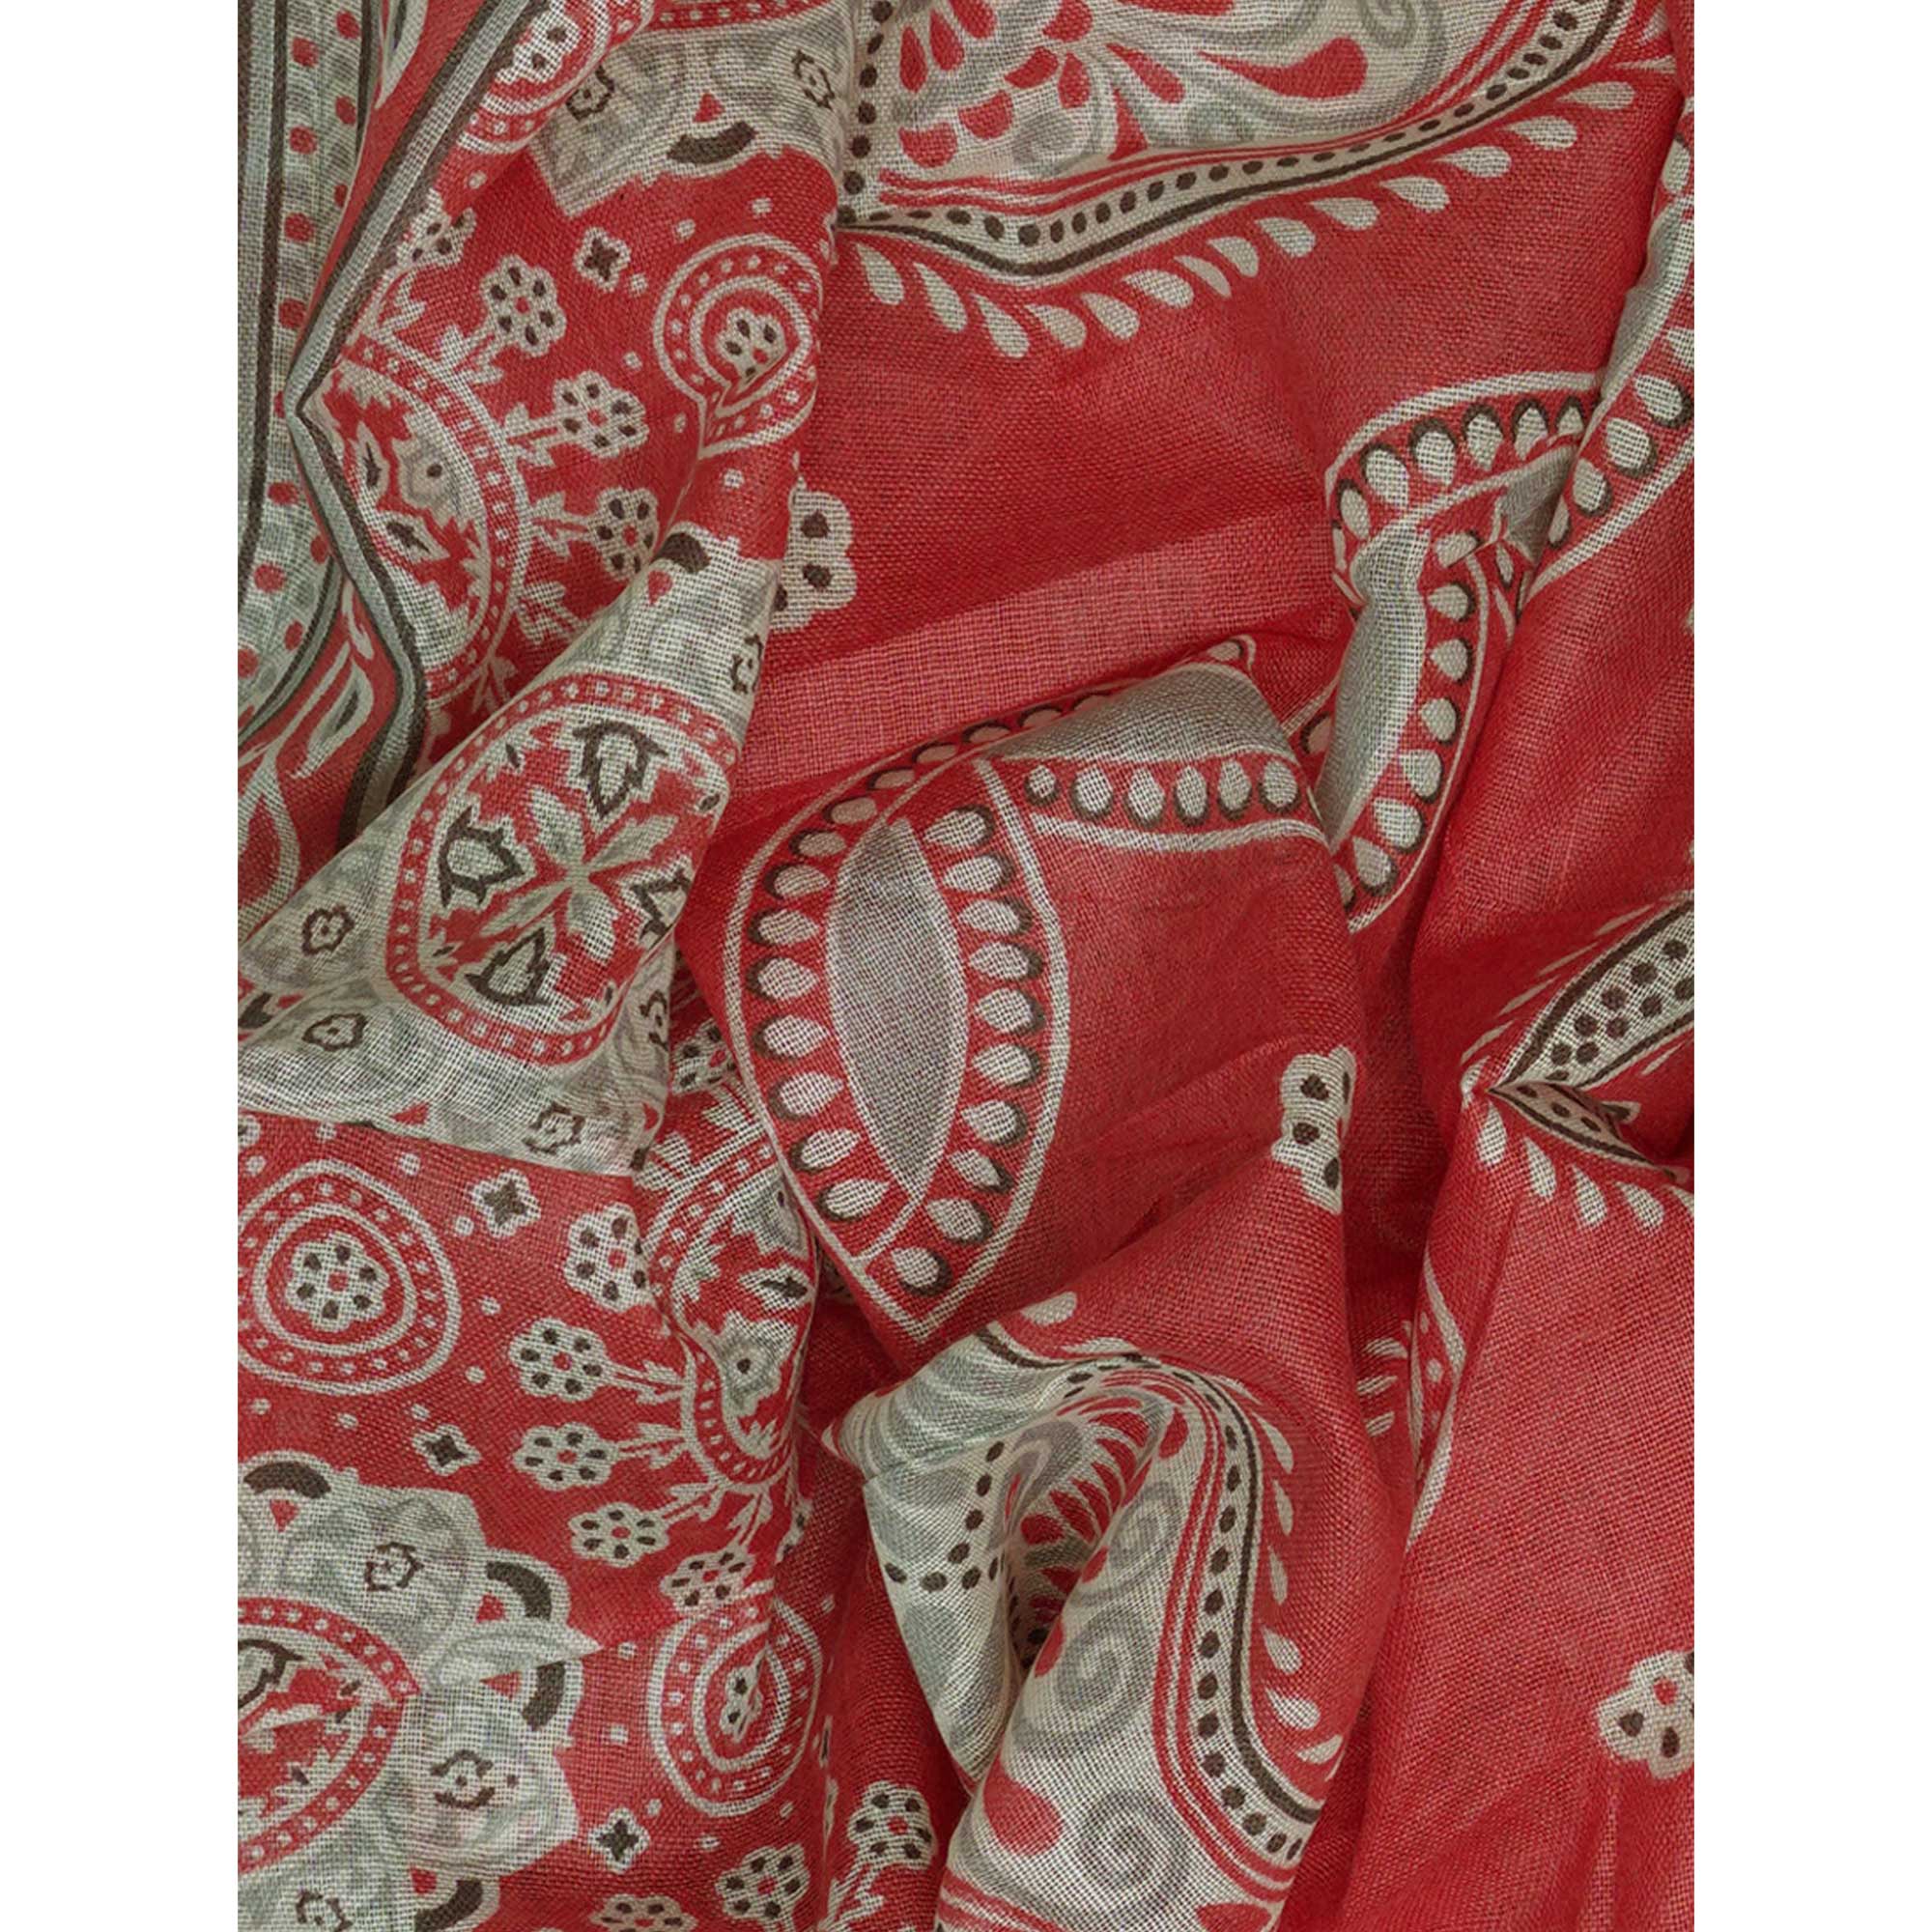 Red Floral Printed Cotton Blend Dress Material